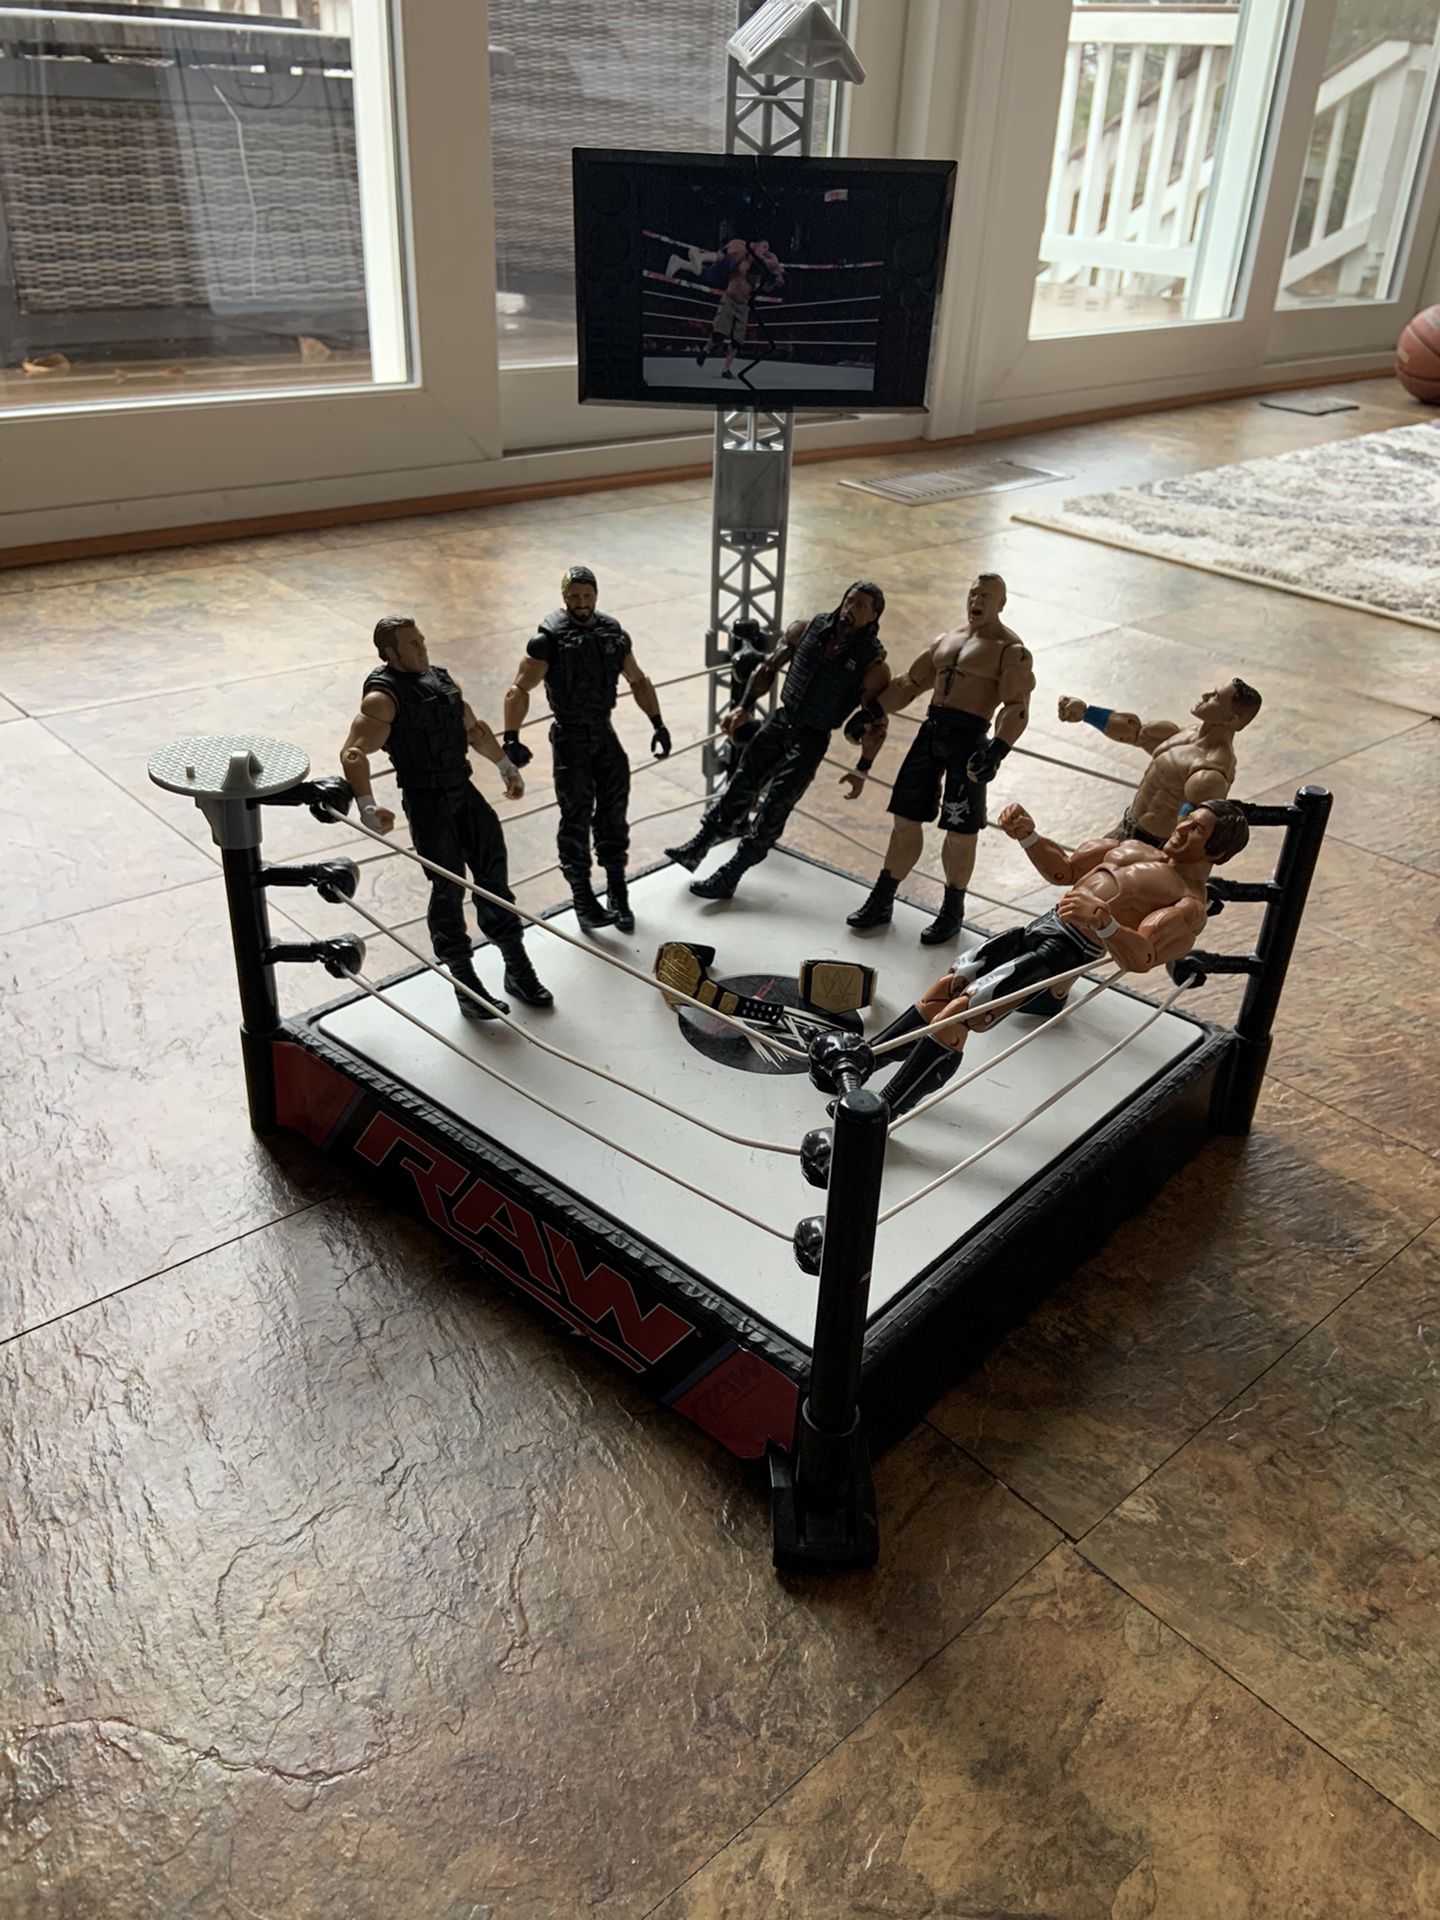 RAW wrestling ring and 6 wrestlers